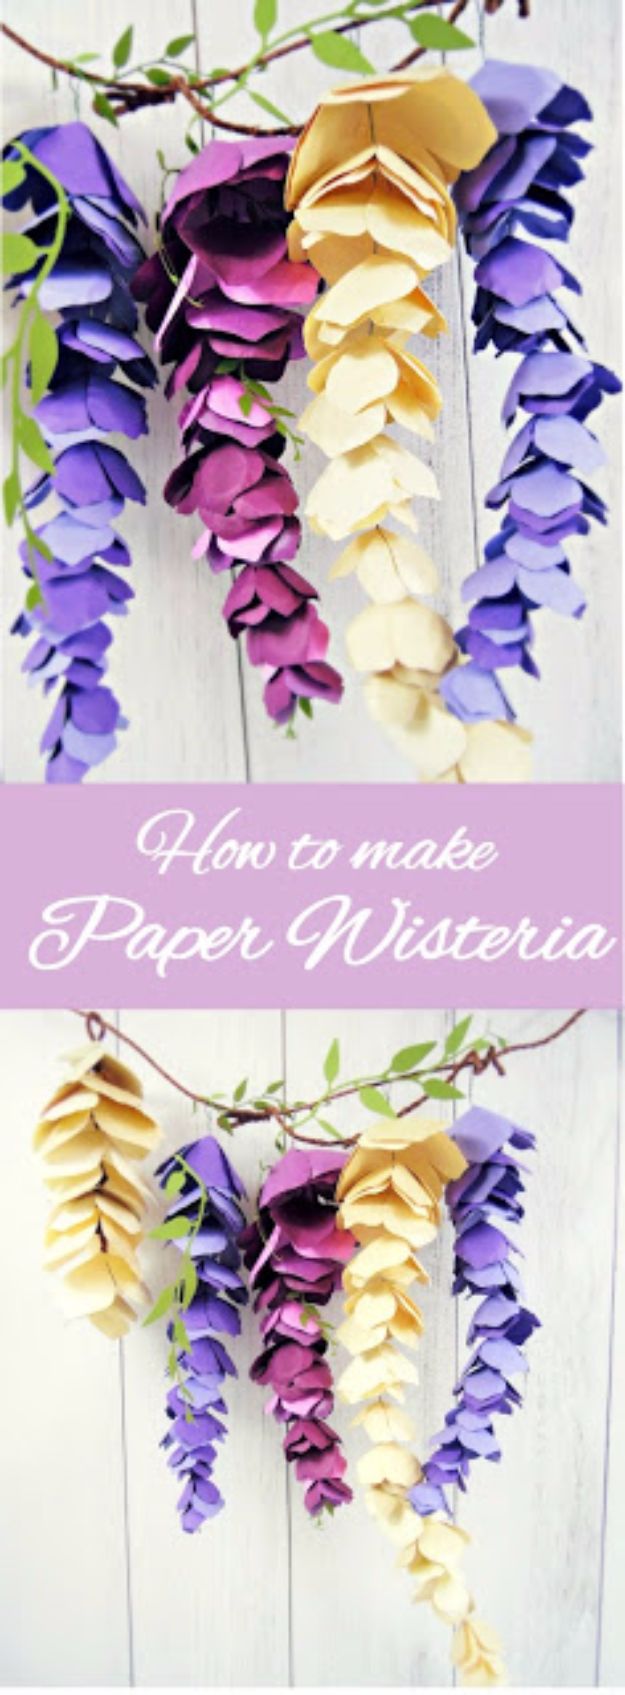 Best Country Crafts For The Home - Hanging Paper Wisteria - Cool and Easy DIY Craft Projects for Home Decor, Dollar Store Gifts, Furniture and Kitchen Accessories - Creative Wall Art Ideas, Rustic and Farmhouse Looks, Shabby Chic and Vintage Decor To Make and Sell 